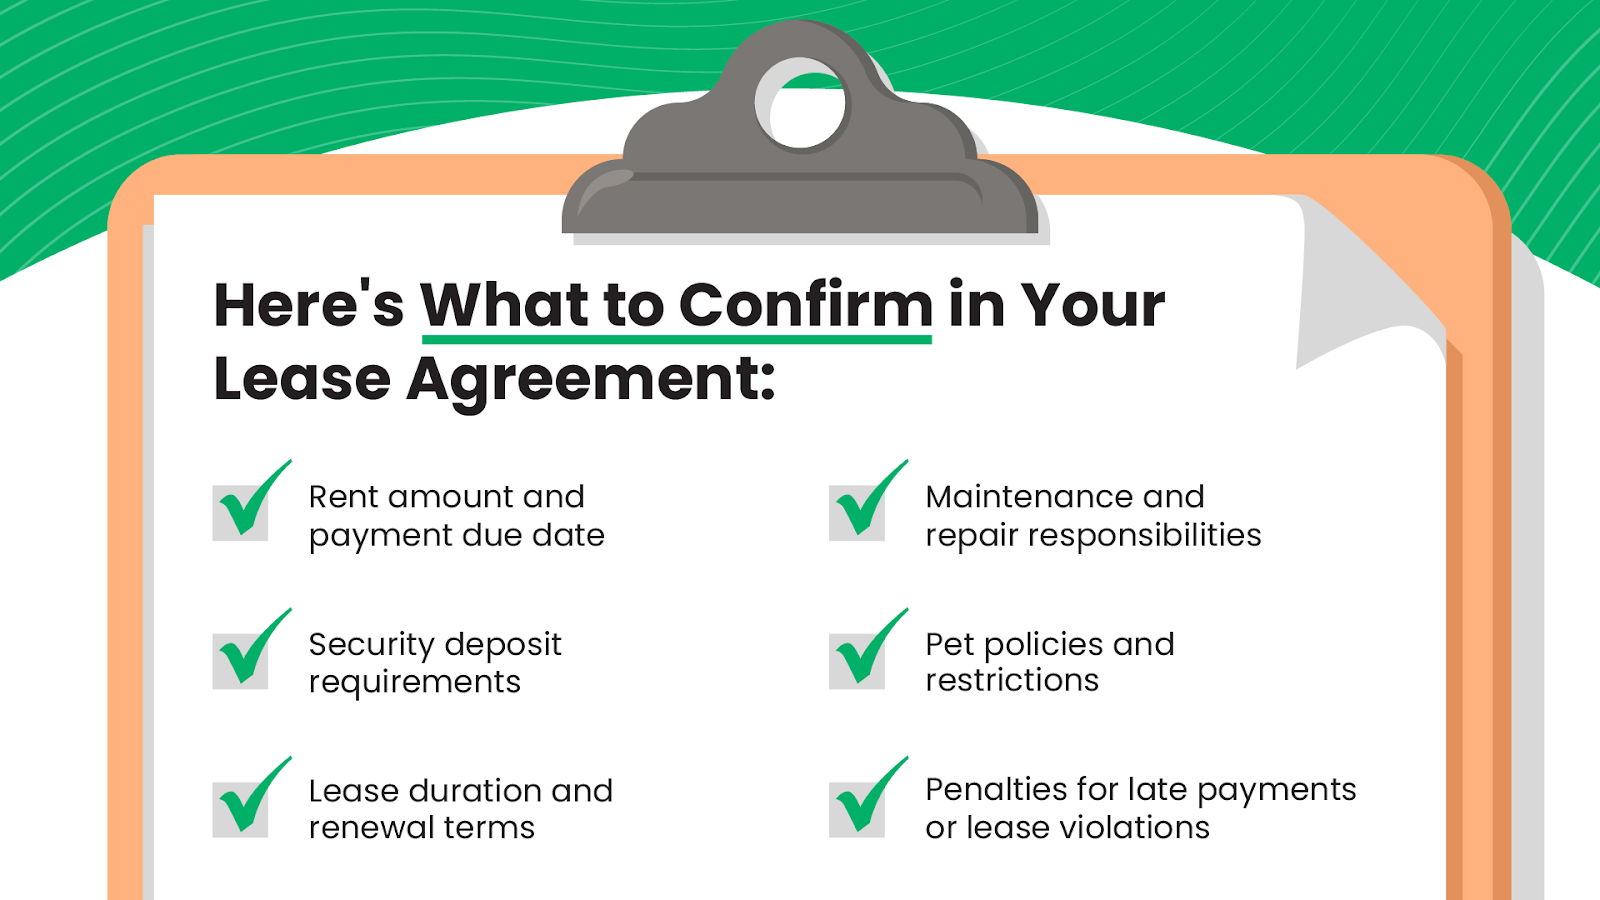 What you should confirm in your lease agreement according to Georgia’s rent increase laws.